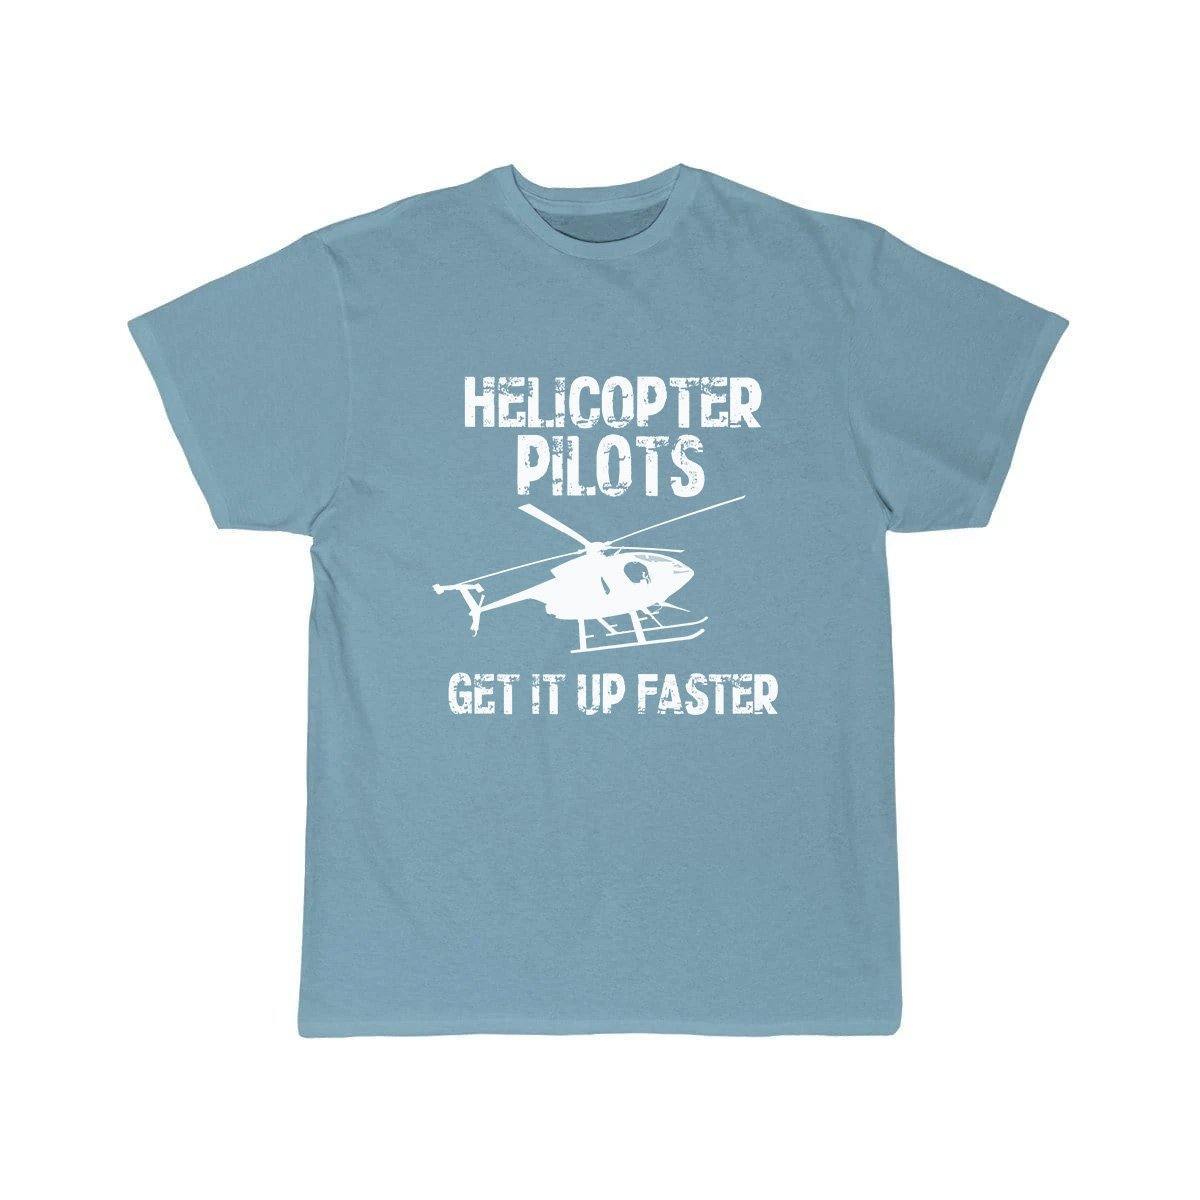 HELICOPTER PILOTS GET IT UP FASTER T SHIRT THE AV8R